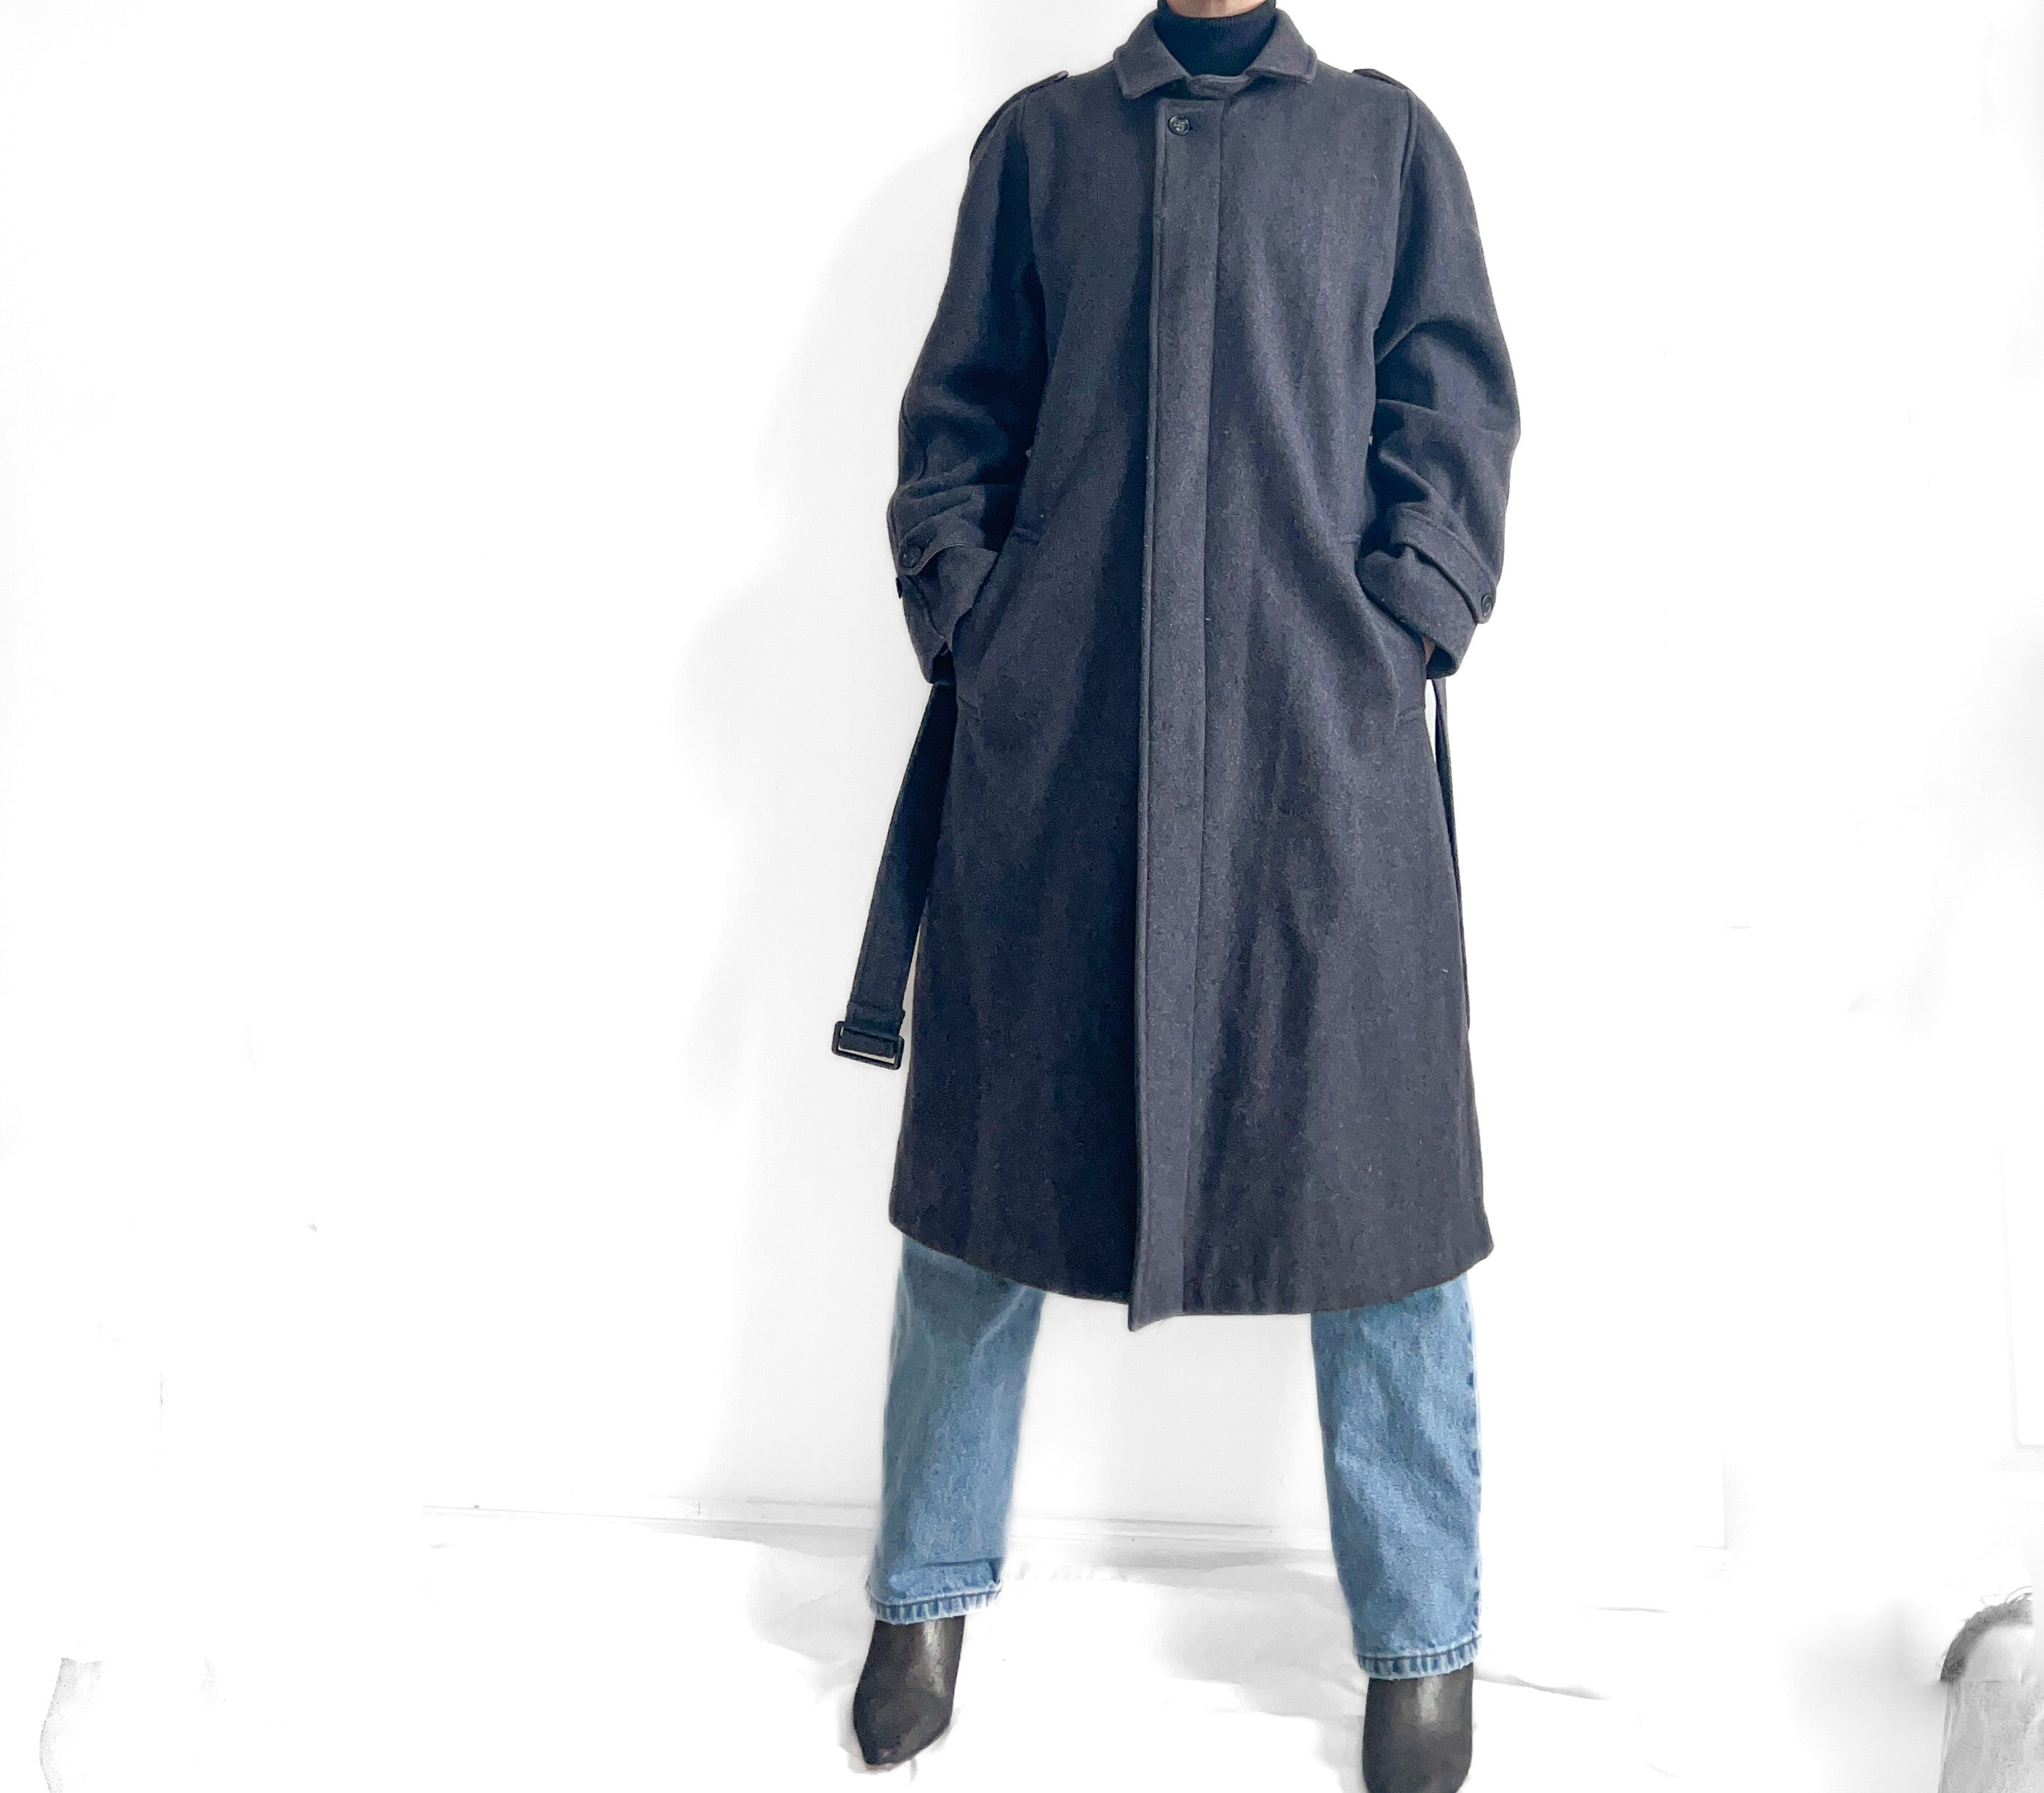 Grey Wool Long Coat, Womans Size Small, Made in Canada